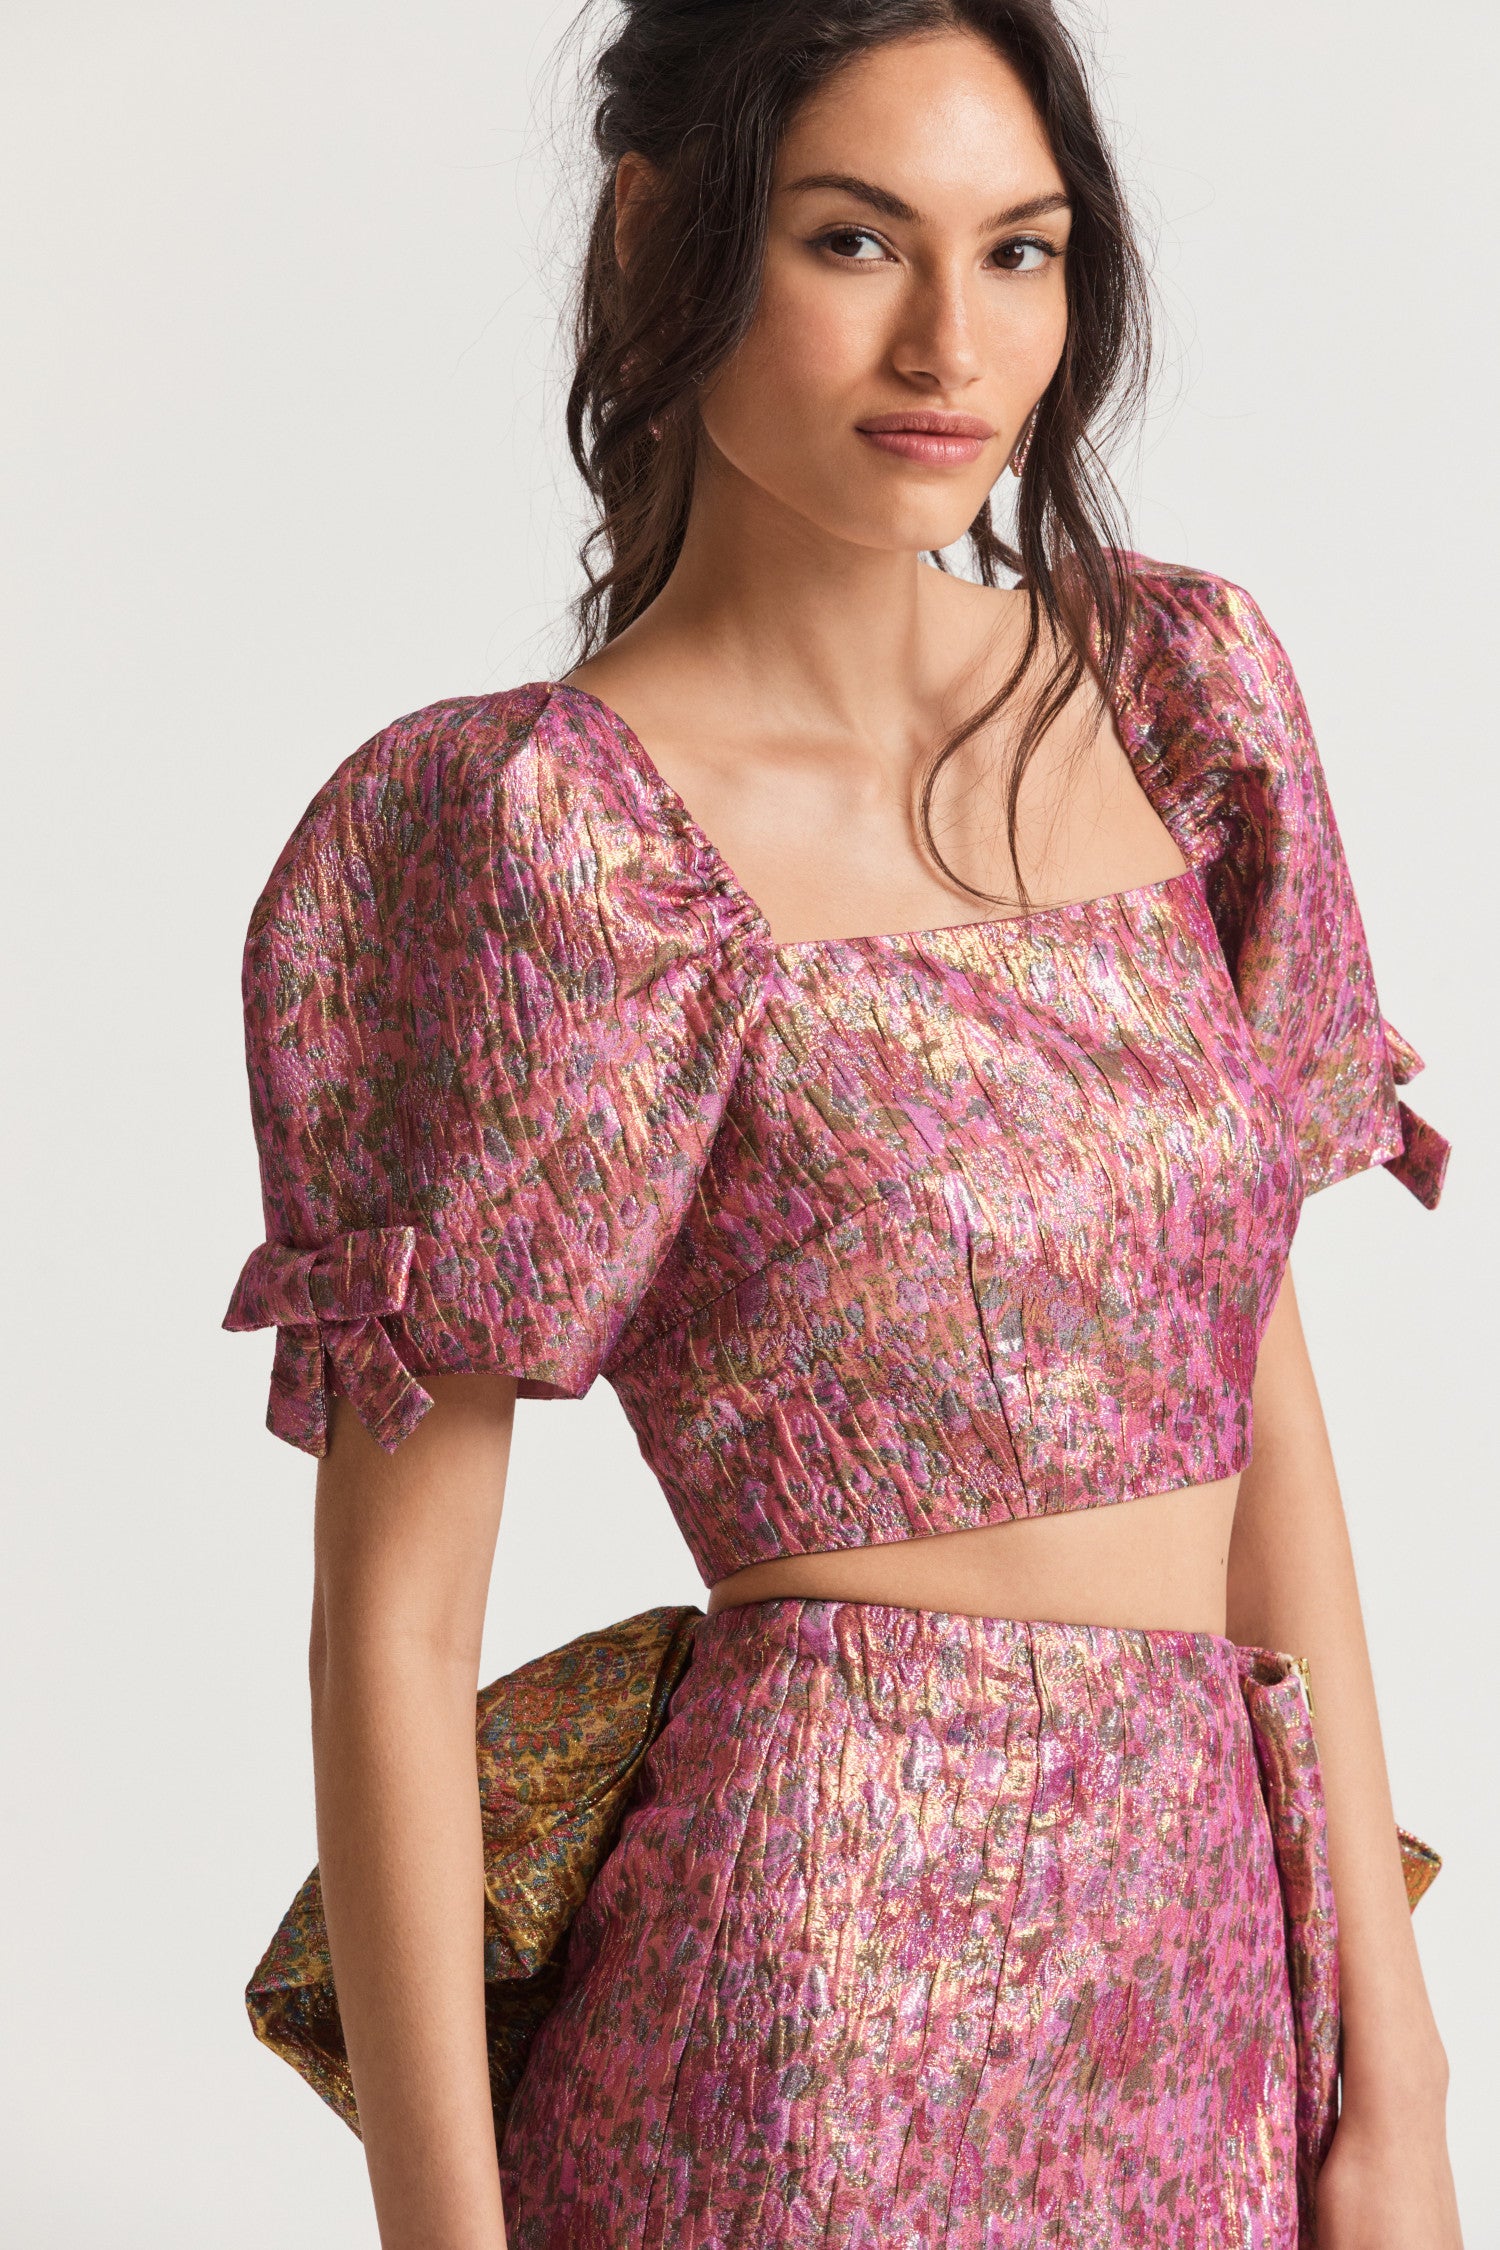  Pink ultra crop top with textural crocheted fabric with and floral print. Puffy sleeves with elastic at the shoulder opening, tiny bows at the sleeves opening, and an exposed zipper at the back bodice. 